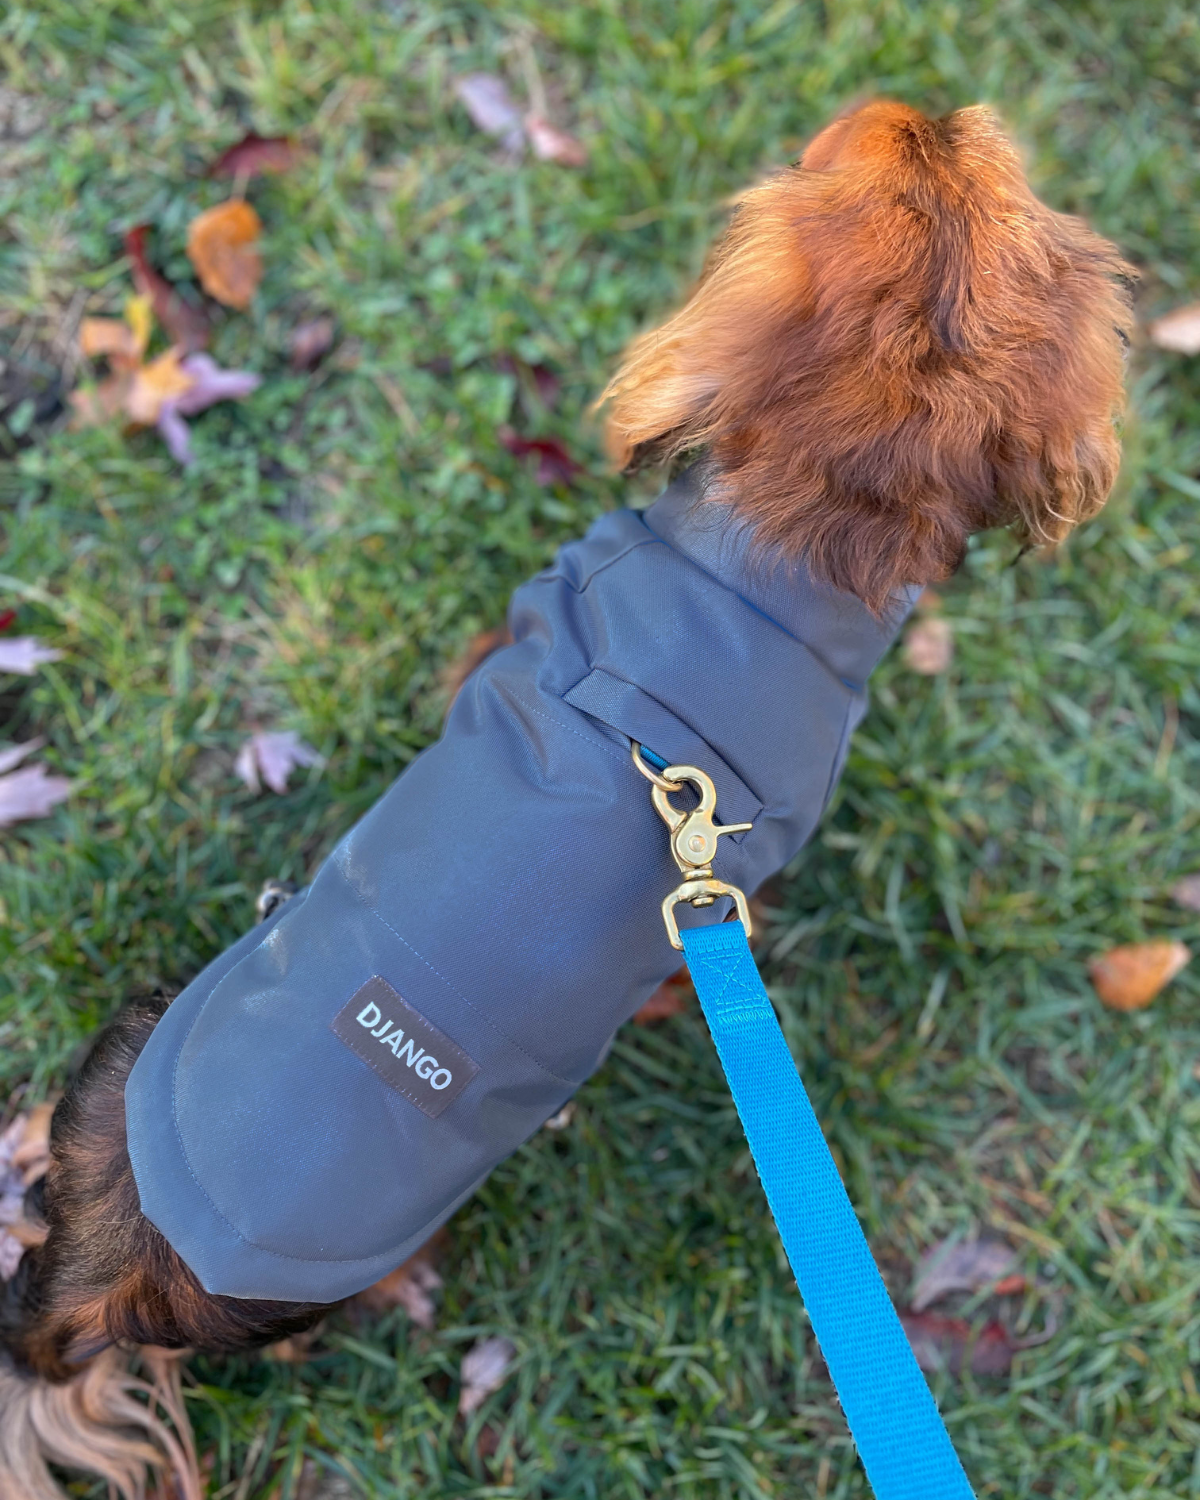 DJANGO’s popular puffer dog coat now features two elastic drawstrings. Adjust your Reversible Puffer’s hem for a custom fit around your dog’s belly and lower back. Our insulated dog coat also now features an oversized, no-leak, and easy-access leash portal that pairs perfectly with your favorite DJANGO dog harness and leash set.